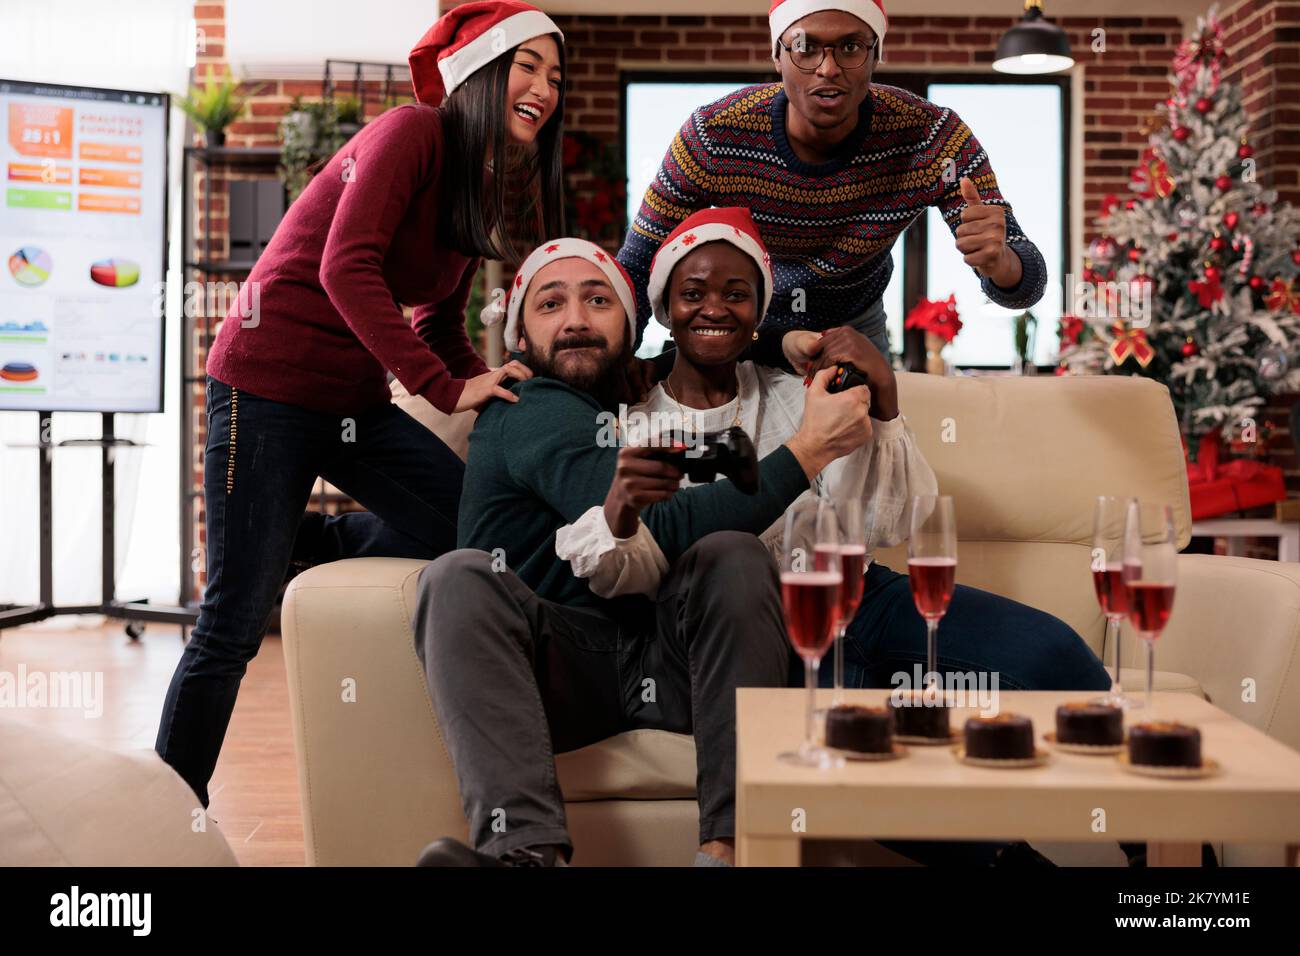 Happy coworkers having fun with video games at event in festive office decorated with xmas tree and ornaments. Playing competition on console and celebrating christmas holiday festivity. Stock Photo